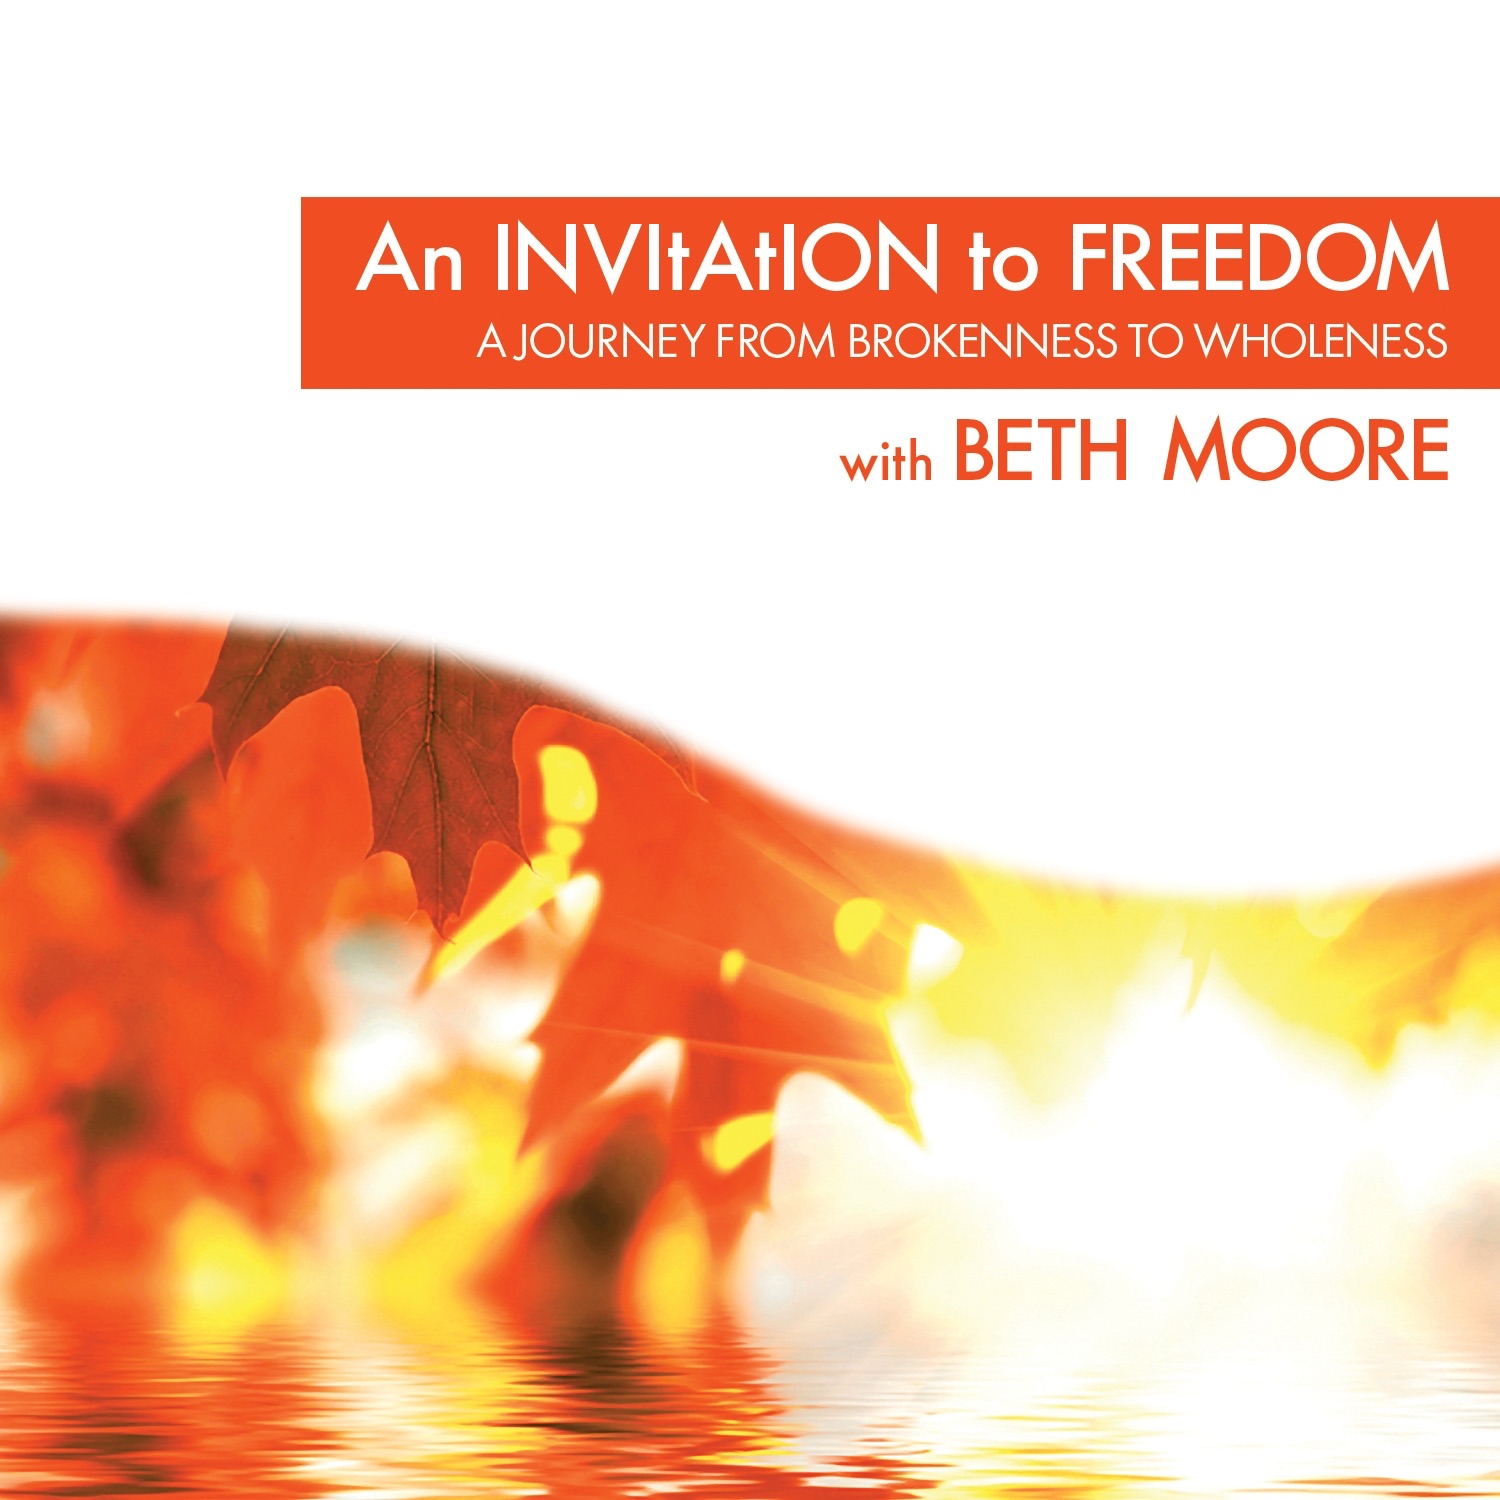 Art for Making Freedom Your New Reality by Beth Moore